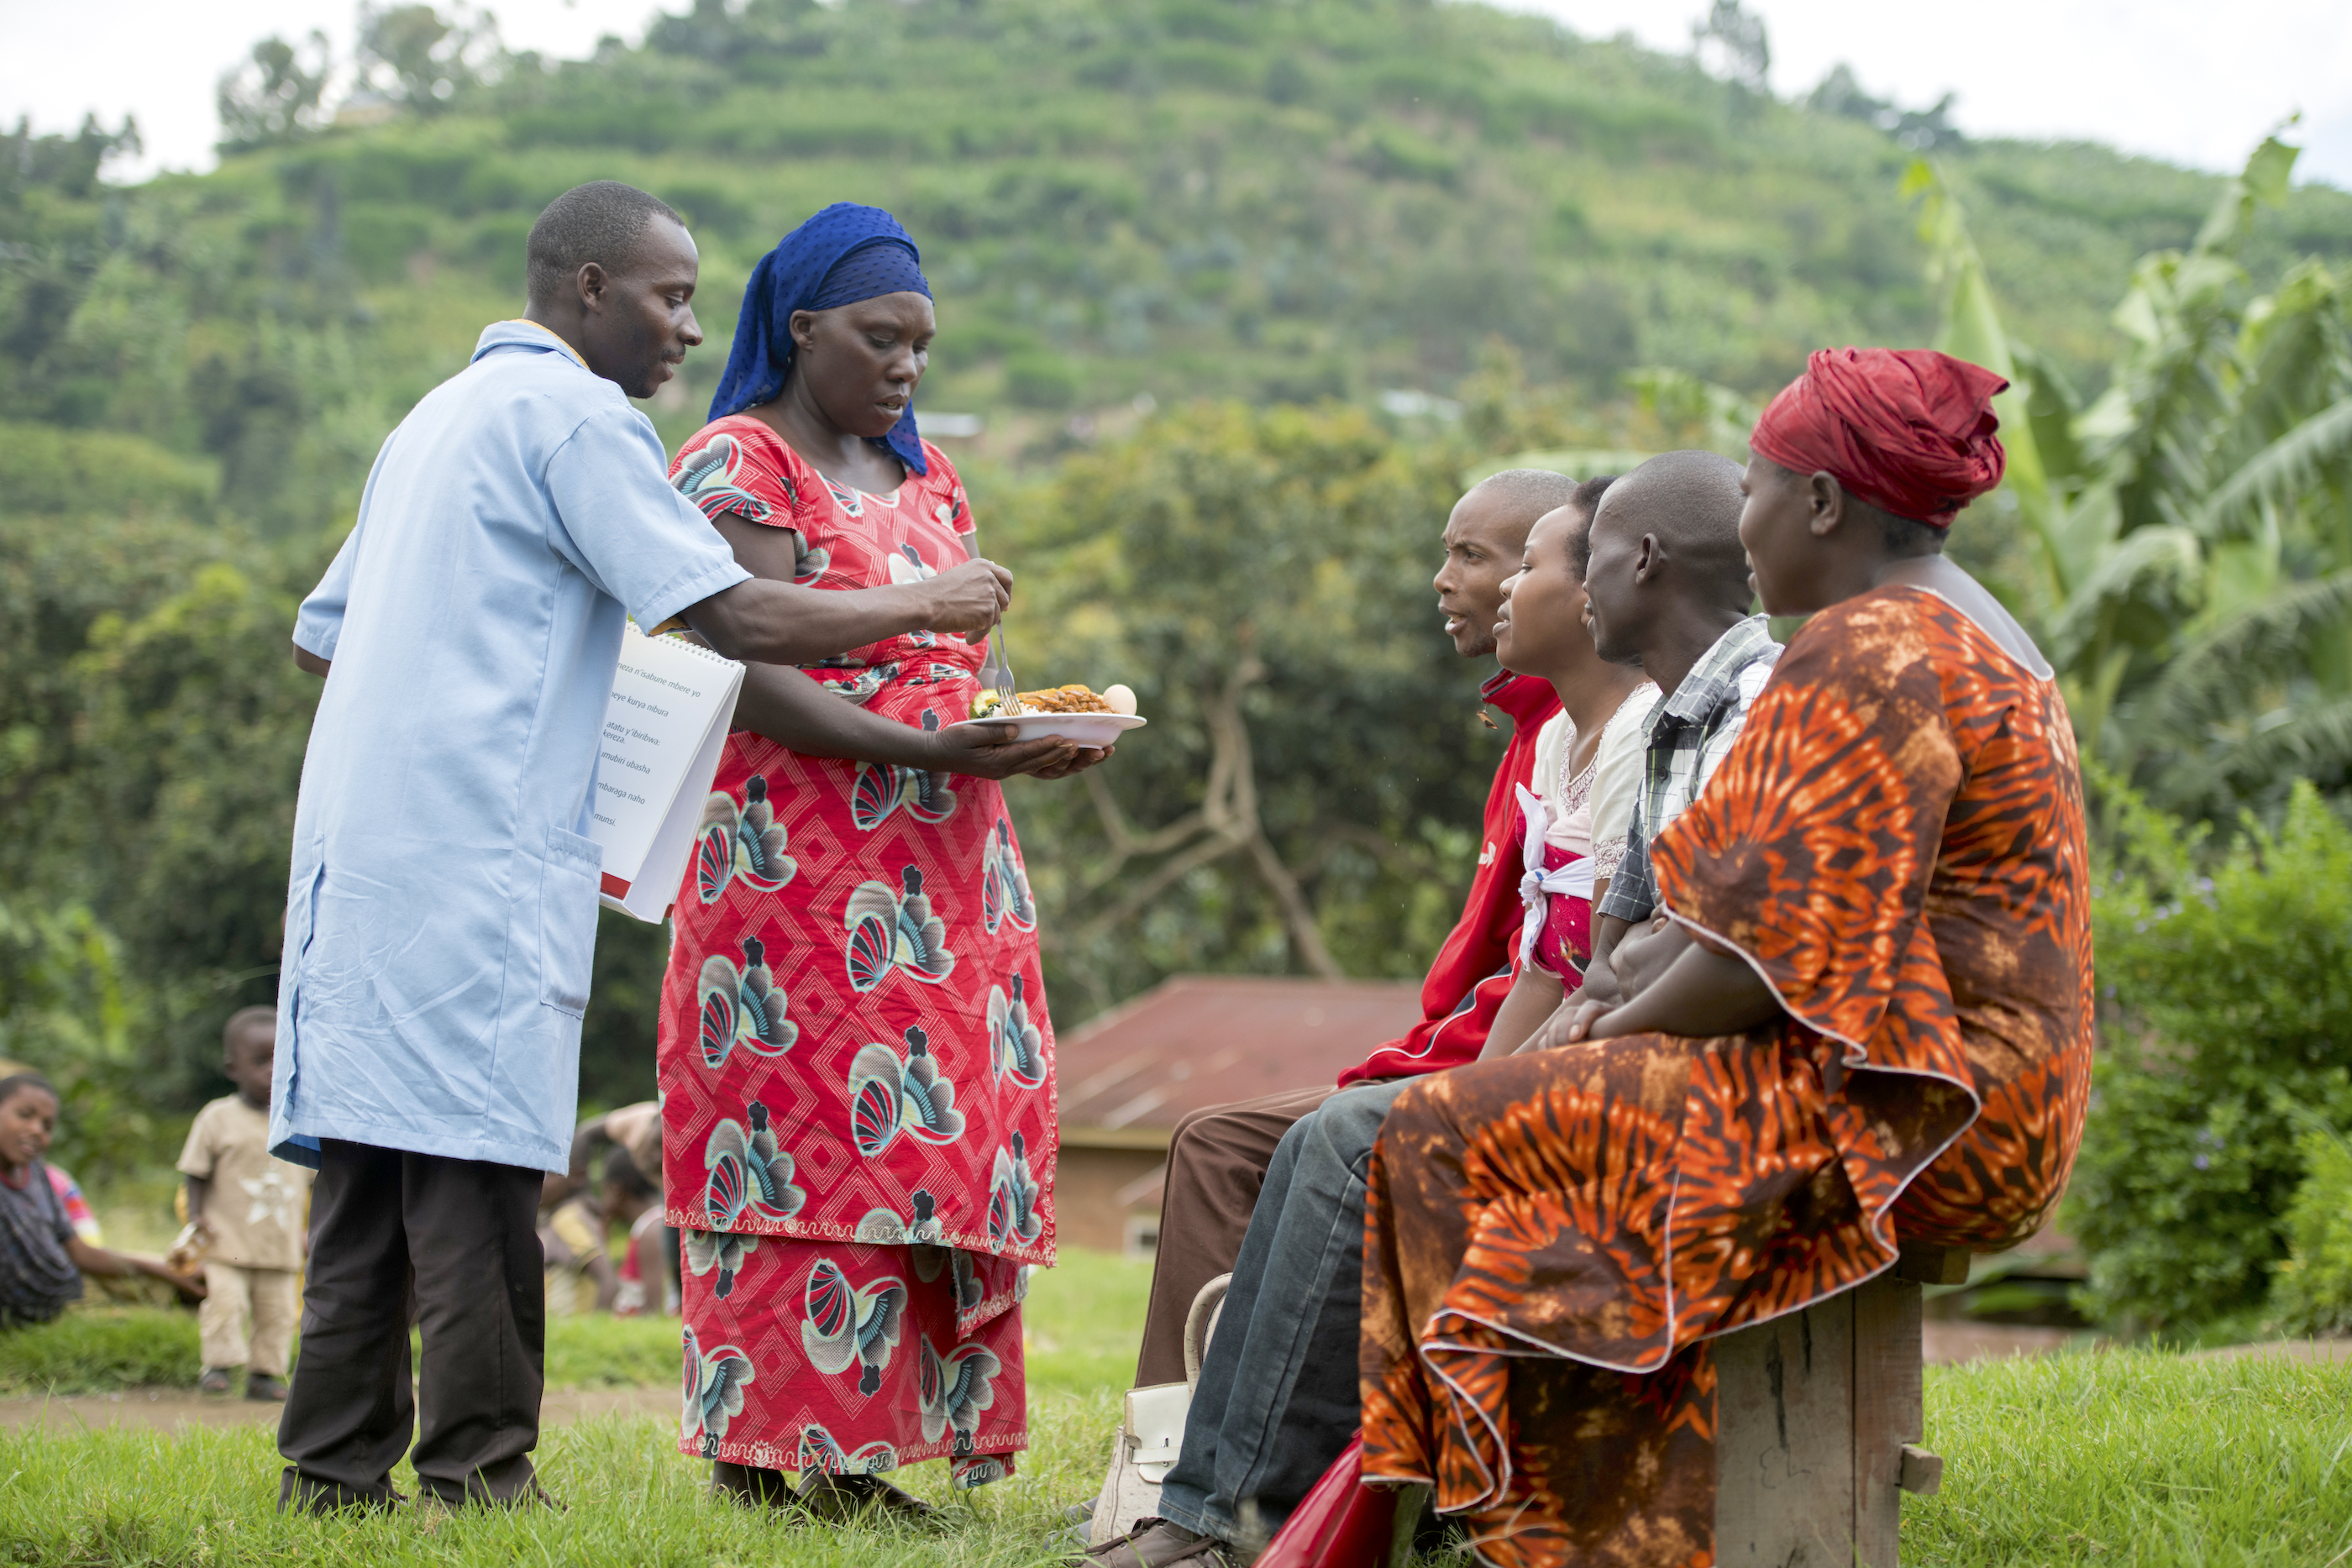 A community health worker in Rwanda talks to people on hygiene and the importance of a balanced diet, as part of the SUSTAIN project. (Photo: CIP)